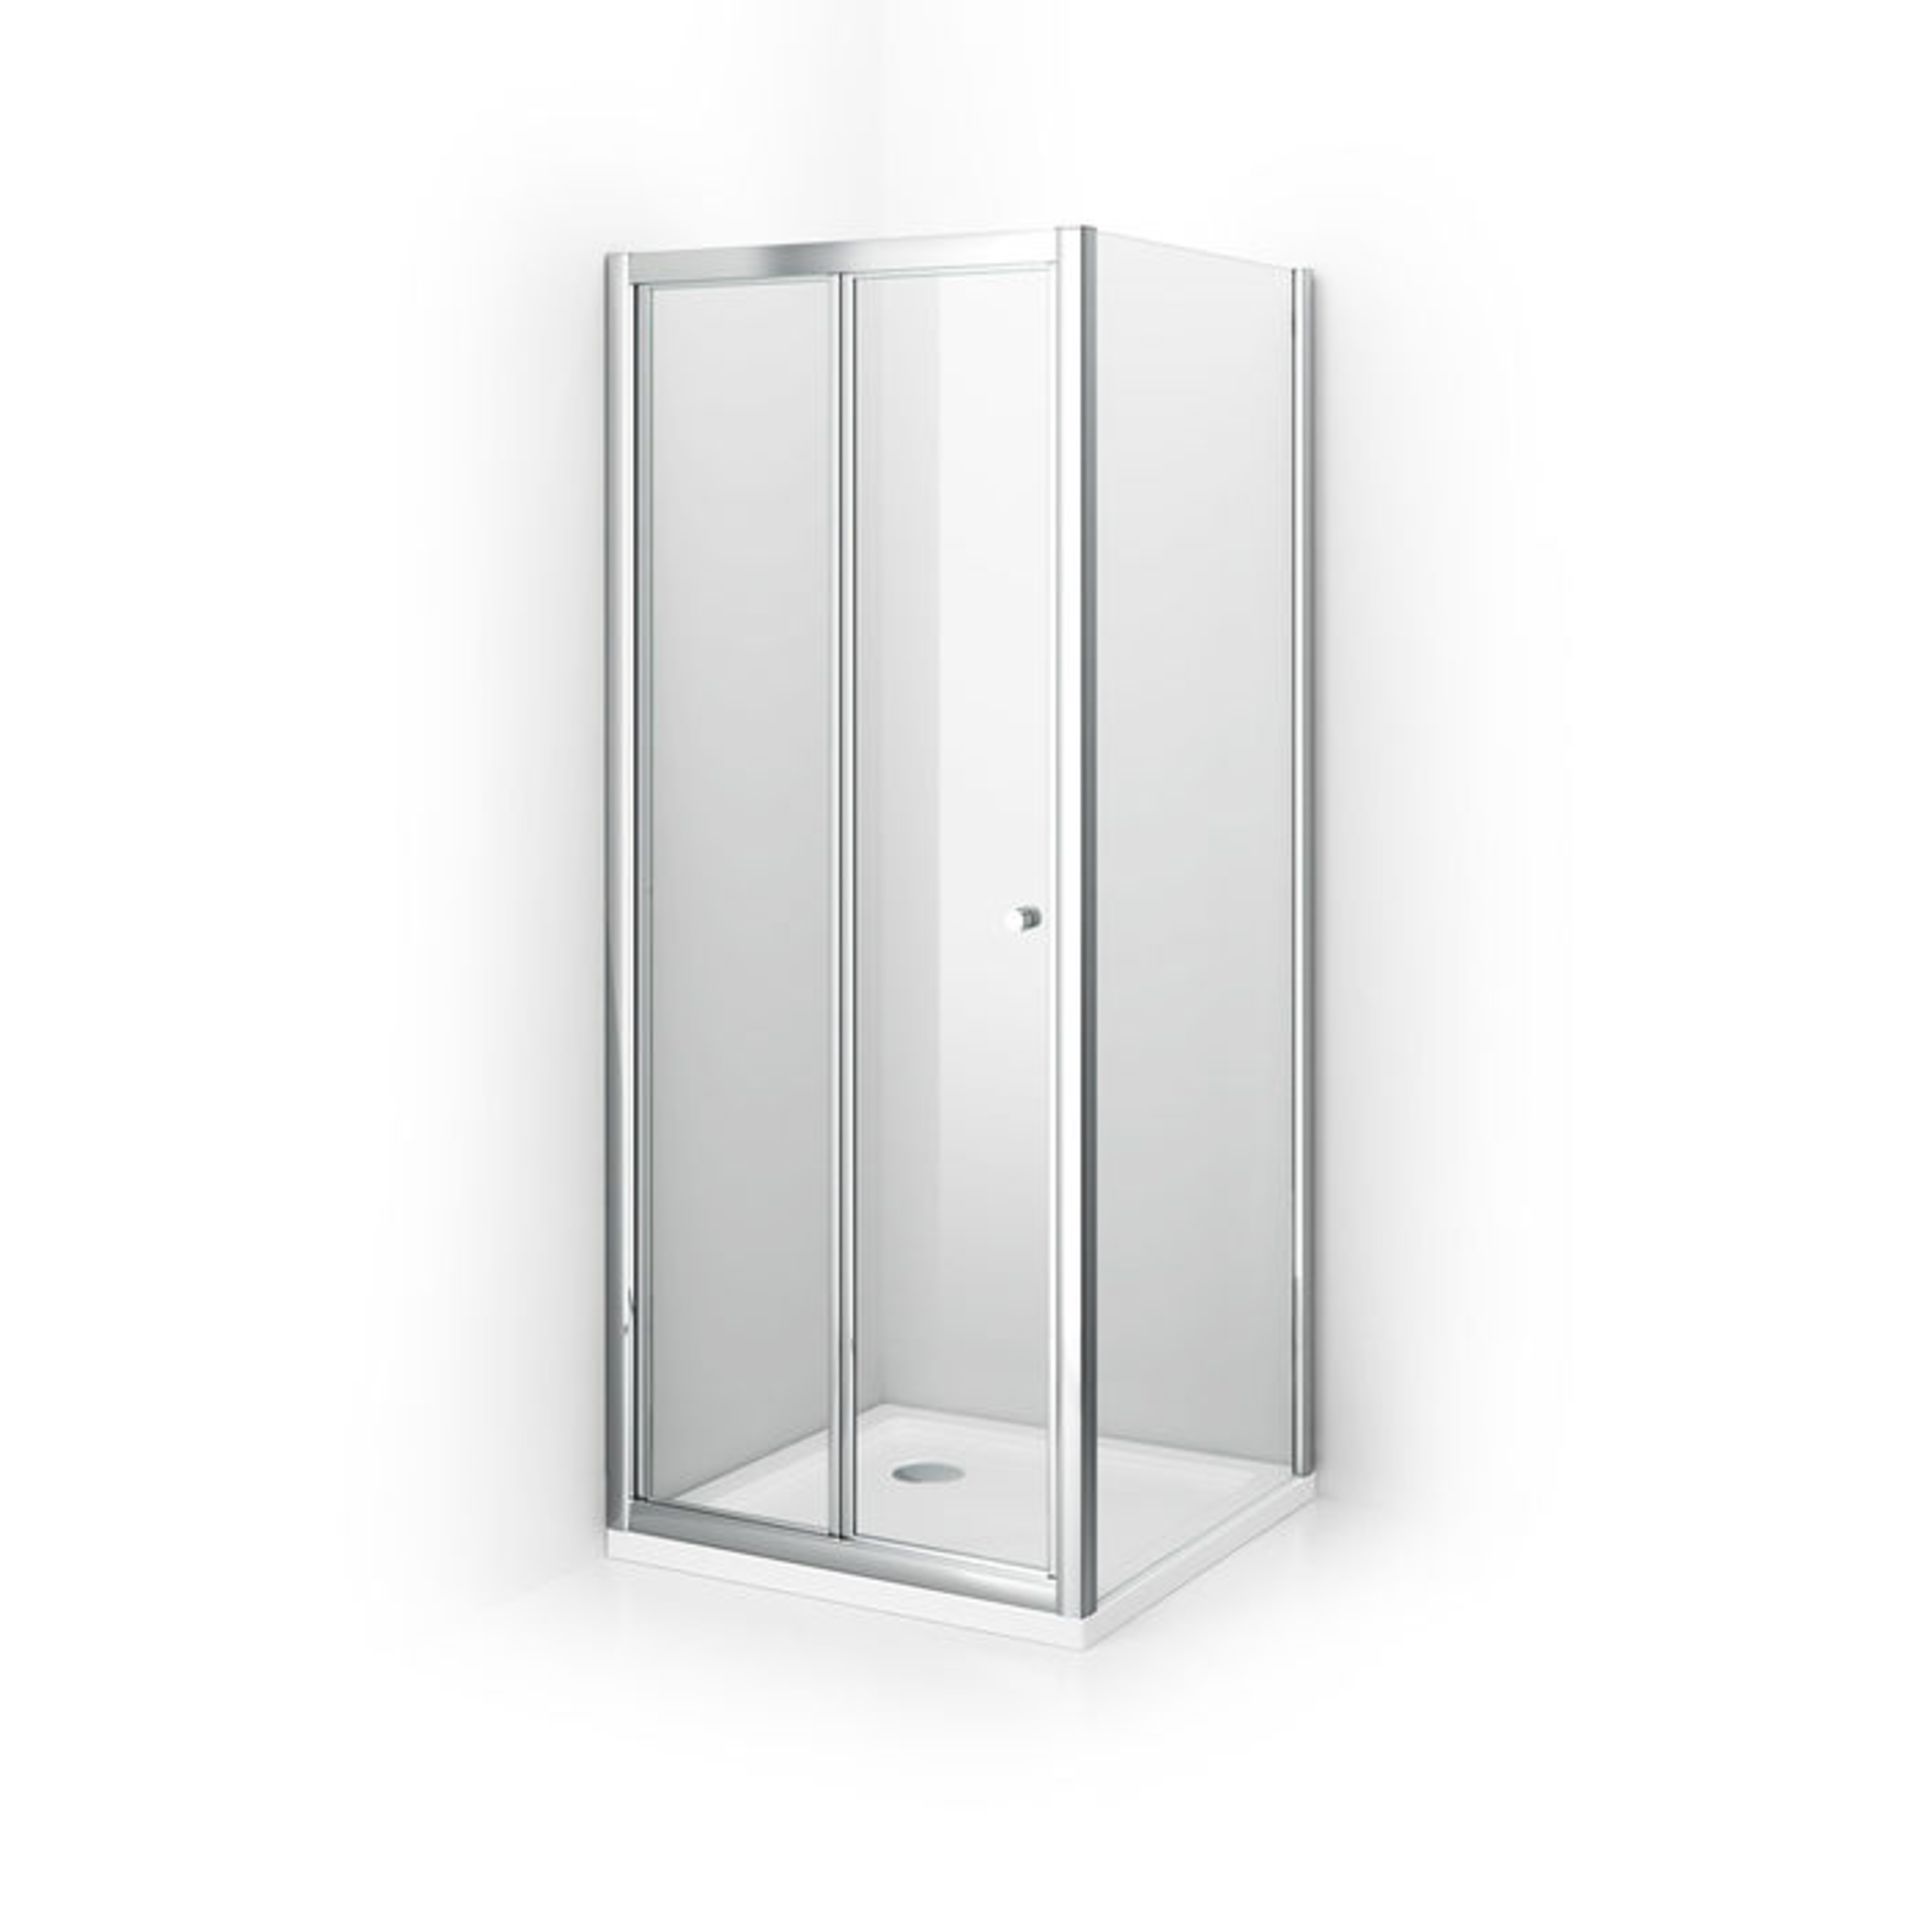 (LP47) 760x760mm Square White Shower Tray.Strong & Slimline low profile design - lightweight without - Image 3 of 3